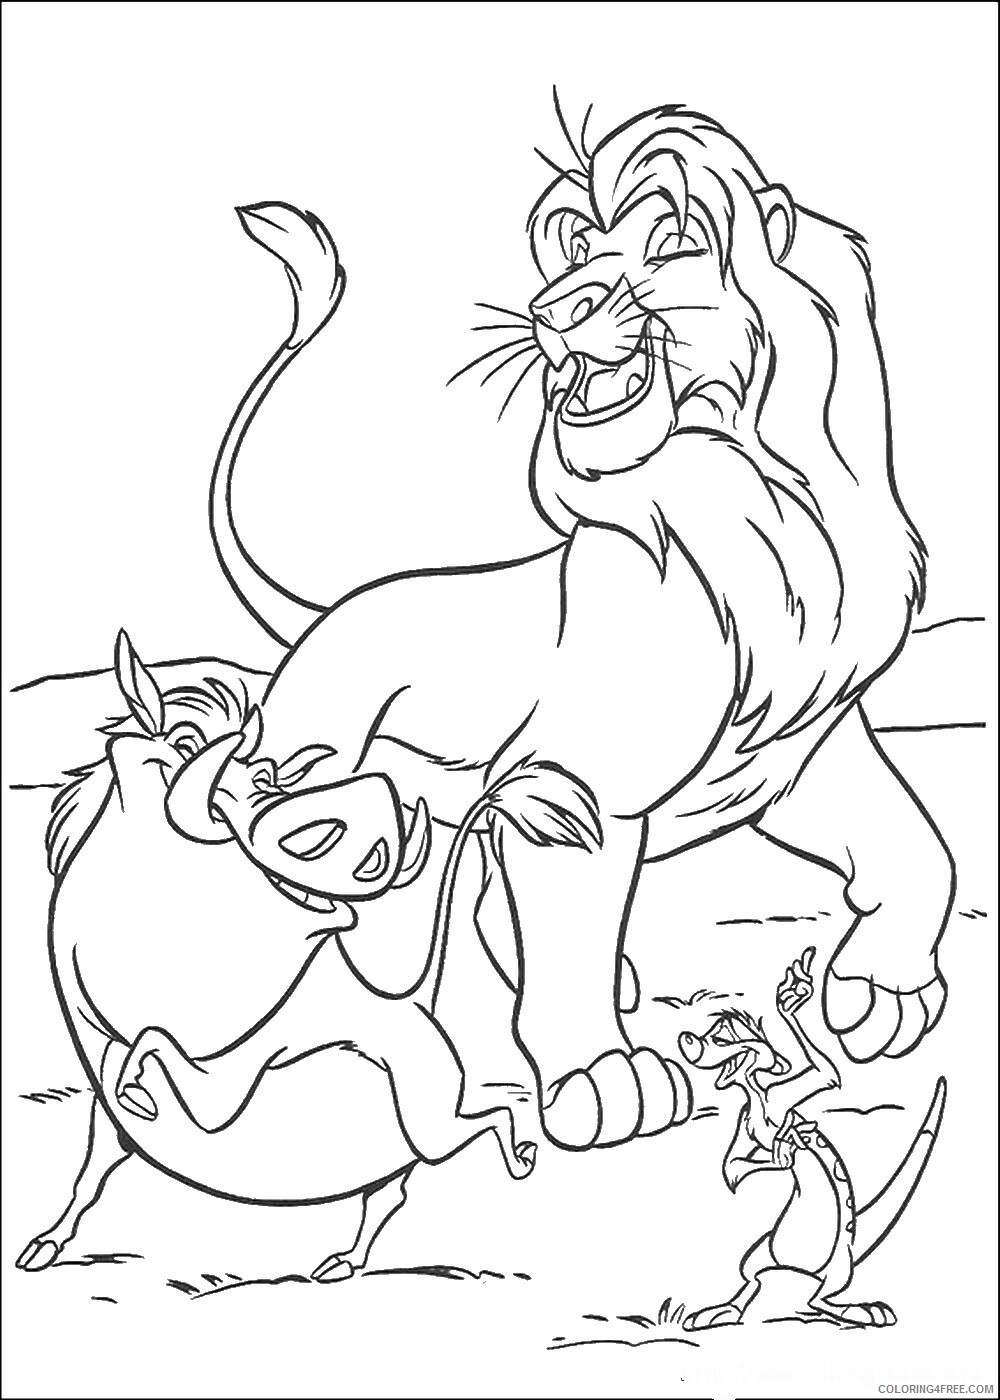 The Lion King Coloring Pages TV Film lionking_83 Printable 2020 09198 Coloring4free